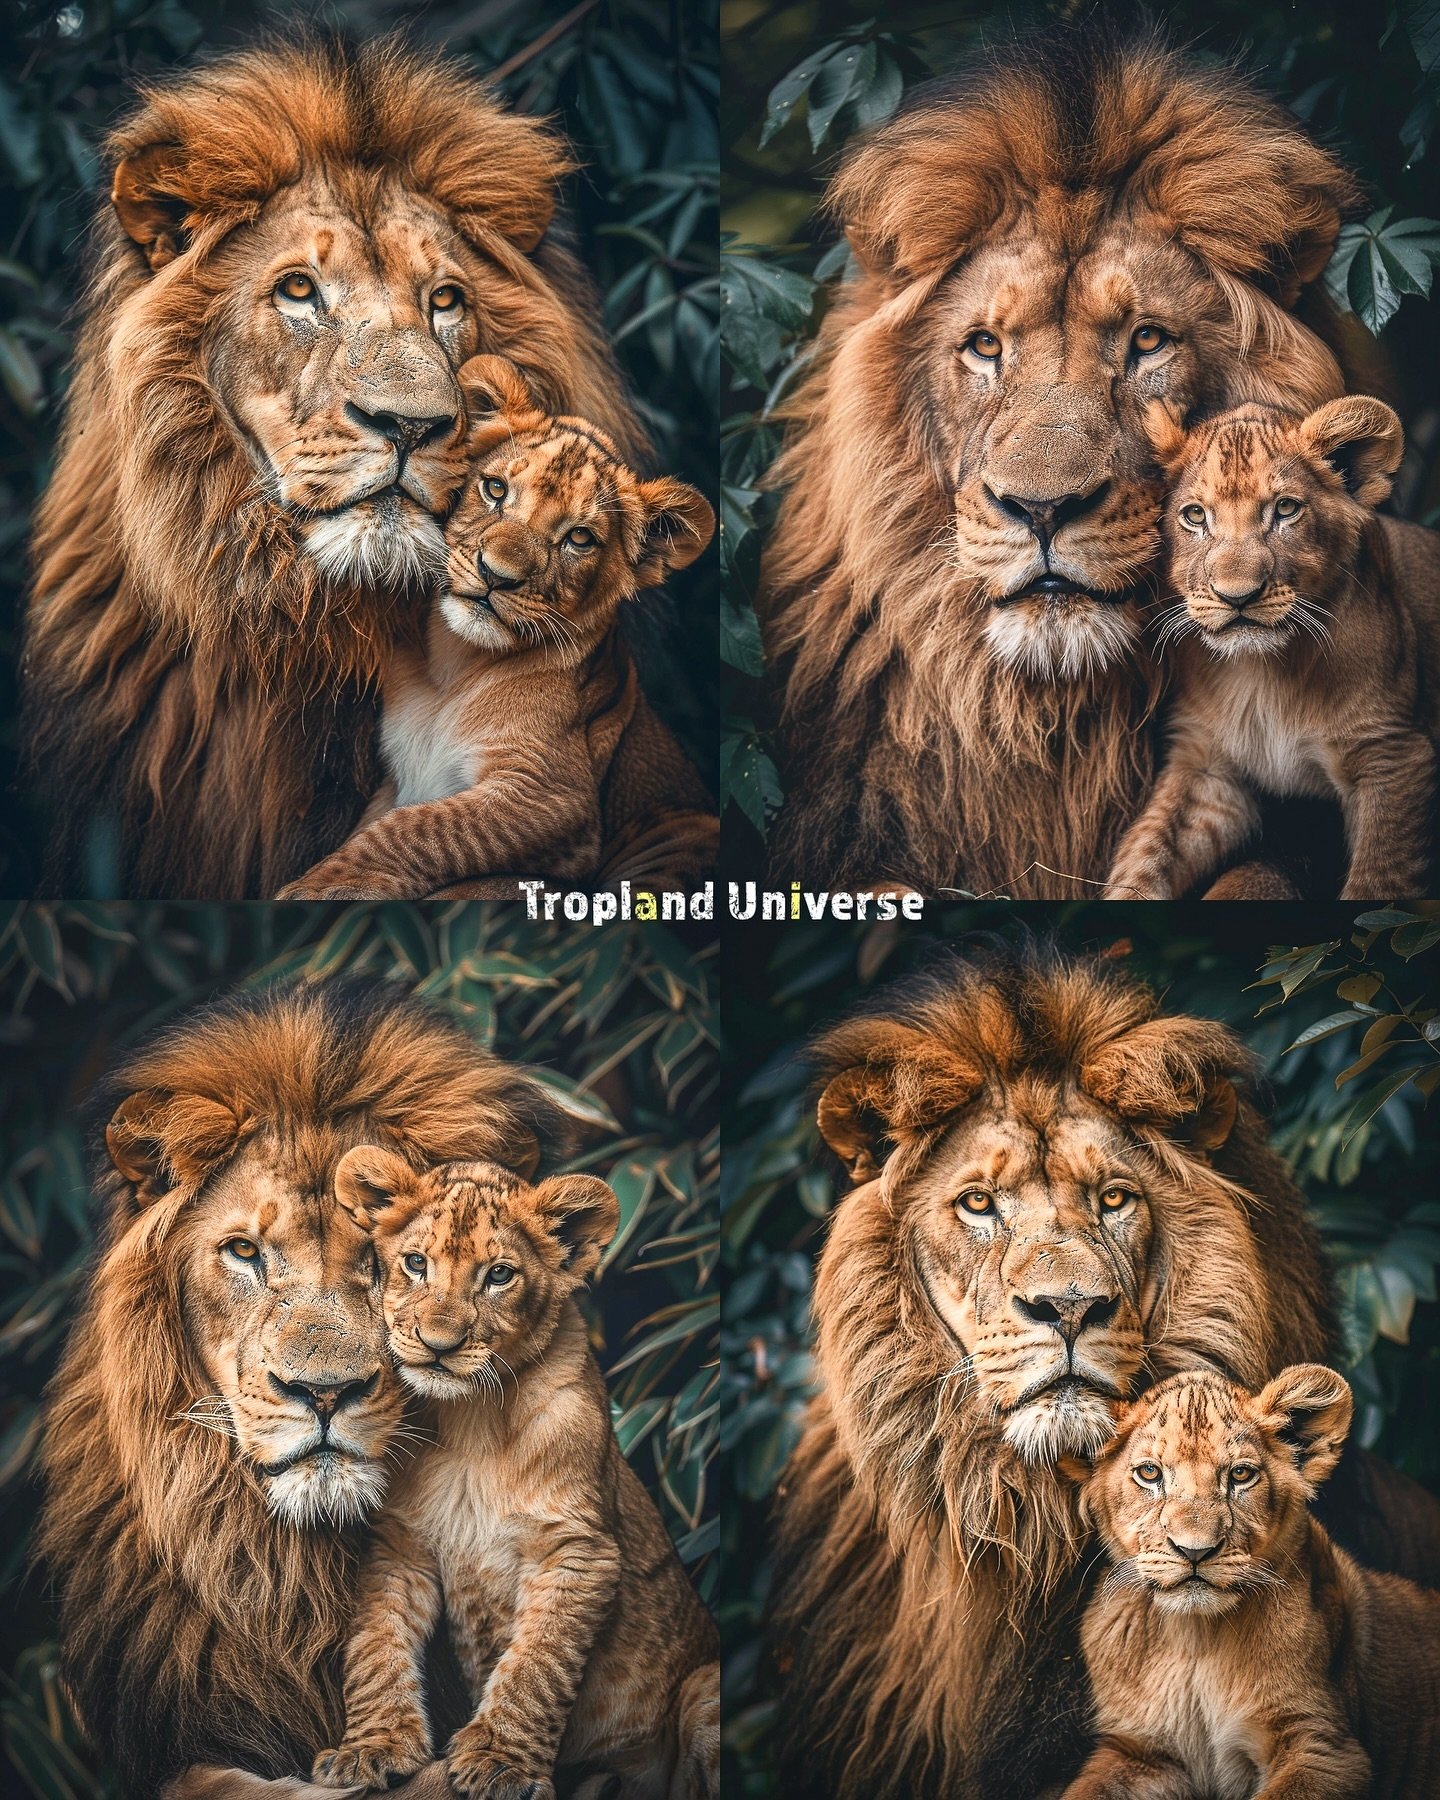 I&rsquo;m feelin the Mufasa Lion King vibes. Which one is your favorite here? 🦁❤️

🦁 Follow me @troplanduniverse for more images like this and a journey beyond the ordinary. 

🎨 Not an actual photo. Crafted using Midjourney, Photoshop, and a selec